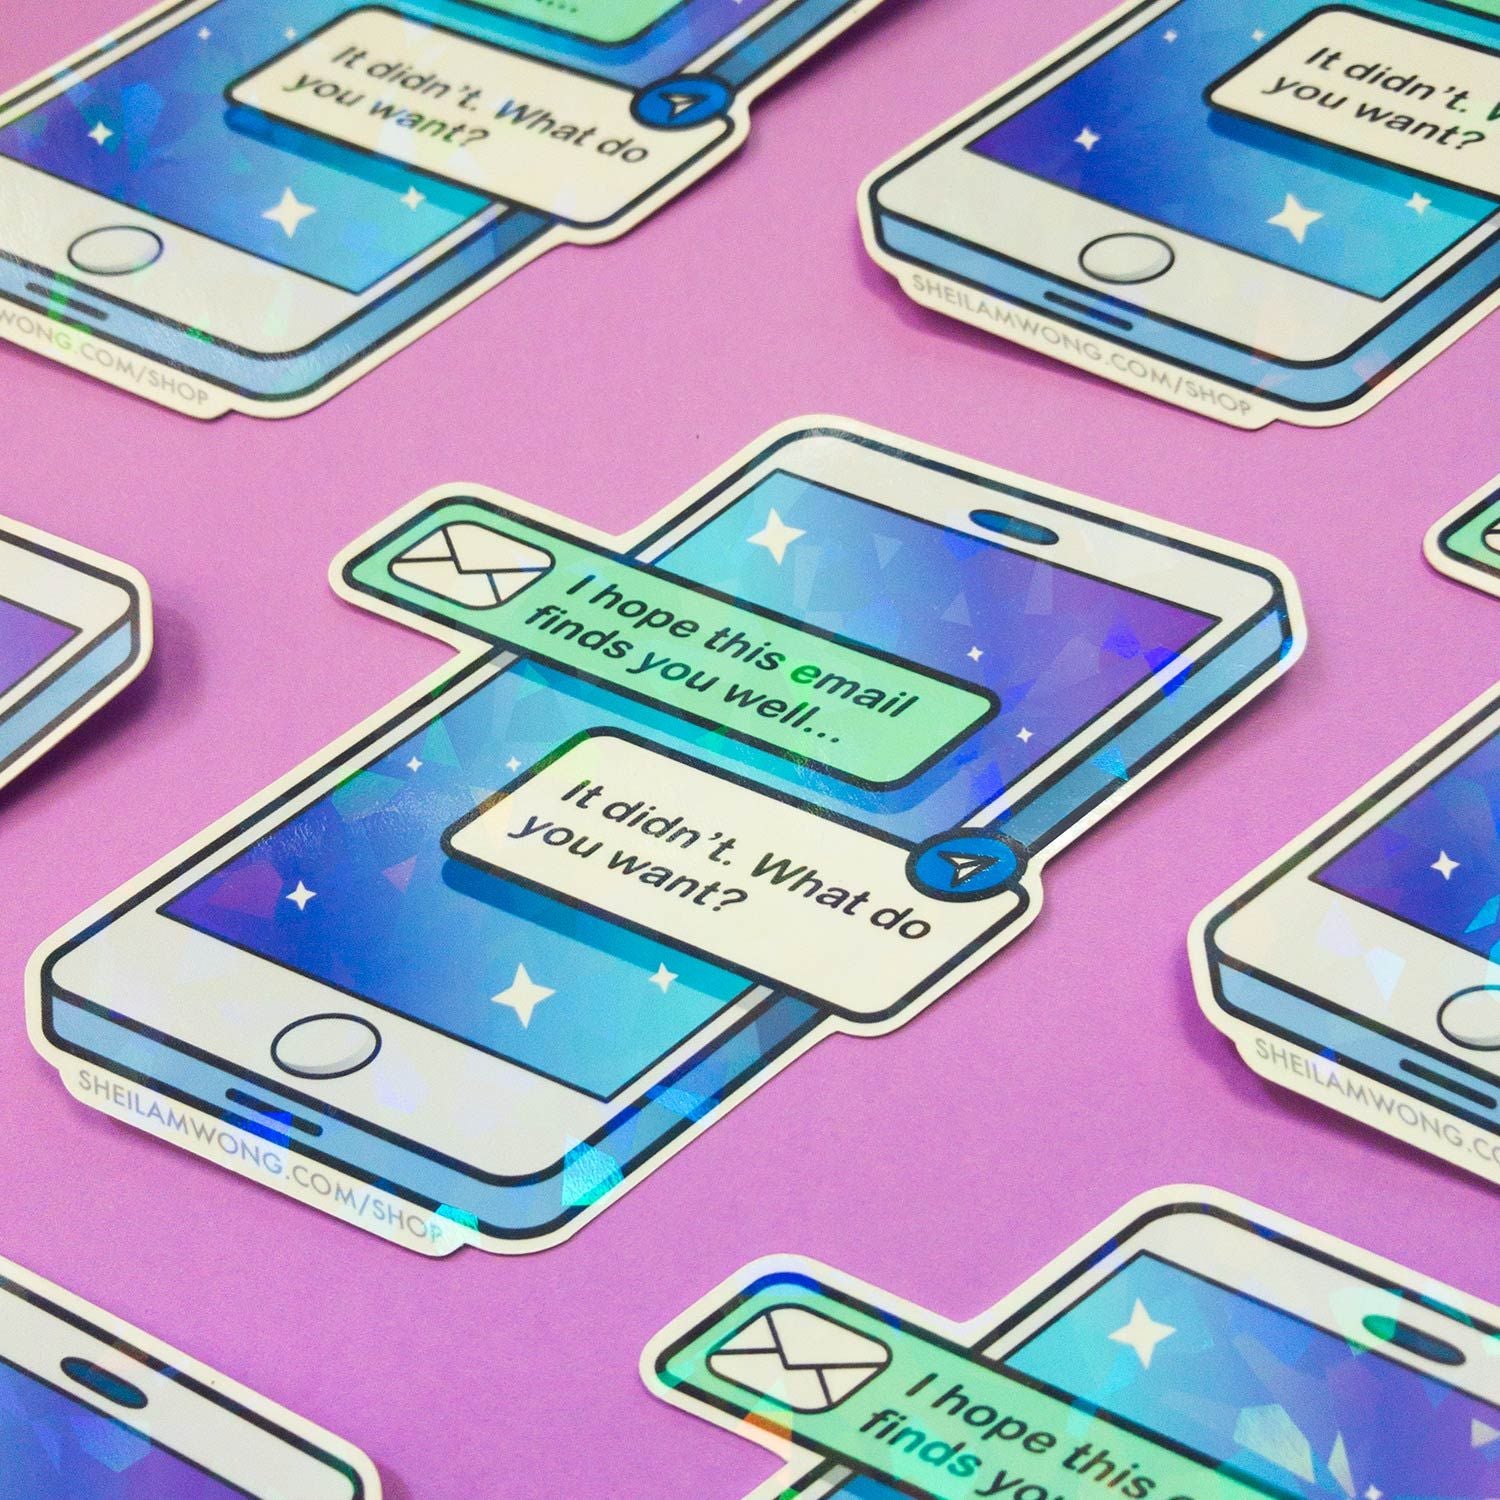 Snarky Email Holographic Sticker